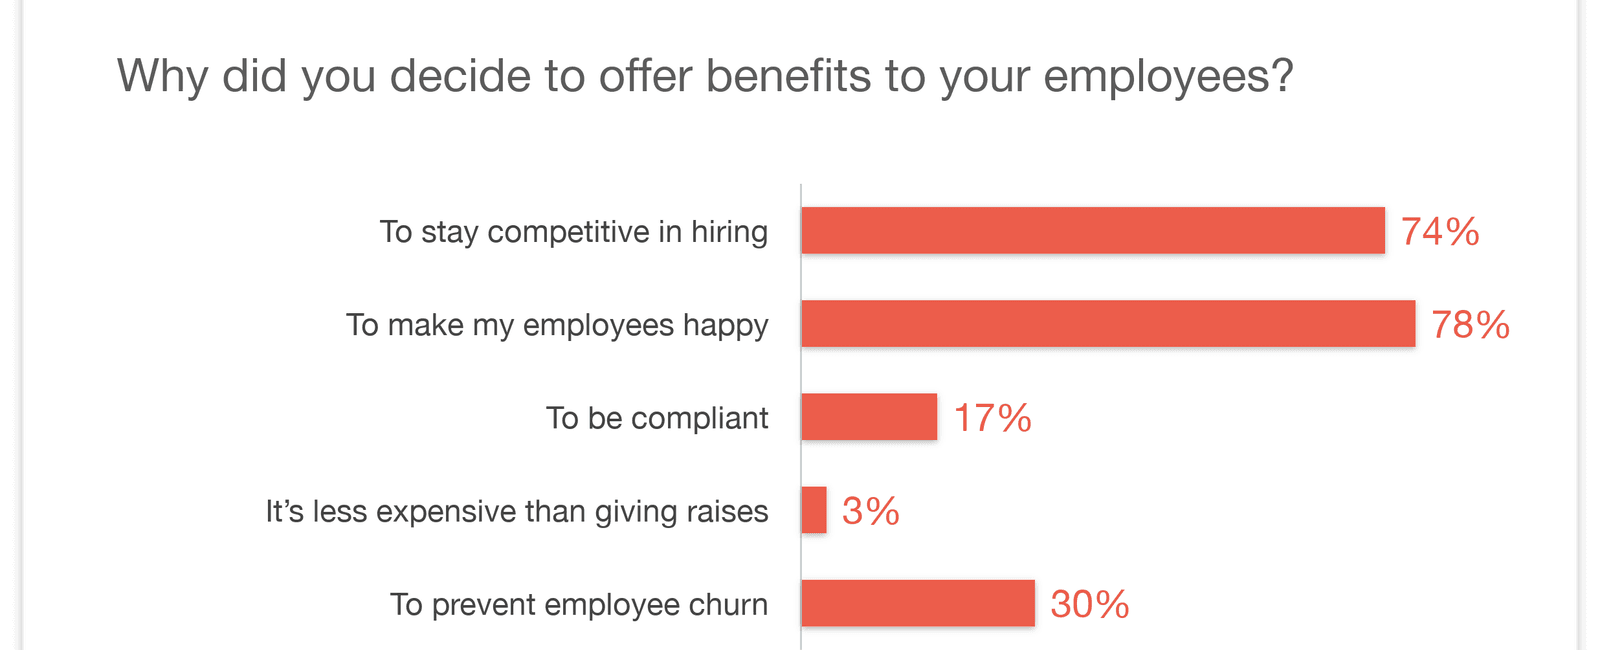 Almost 9 in 10 small businesses offer a medical plan to their employees more than 50 of small businesses aim to offer a better benefits package than their competitors